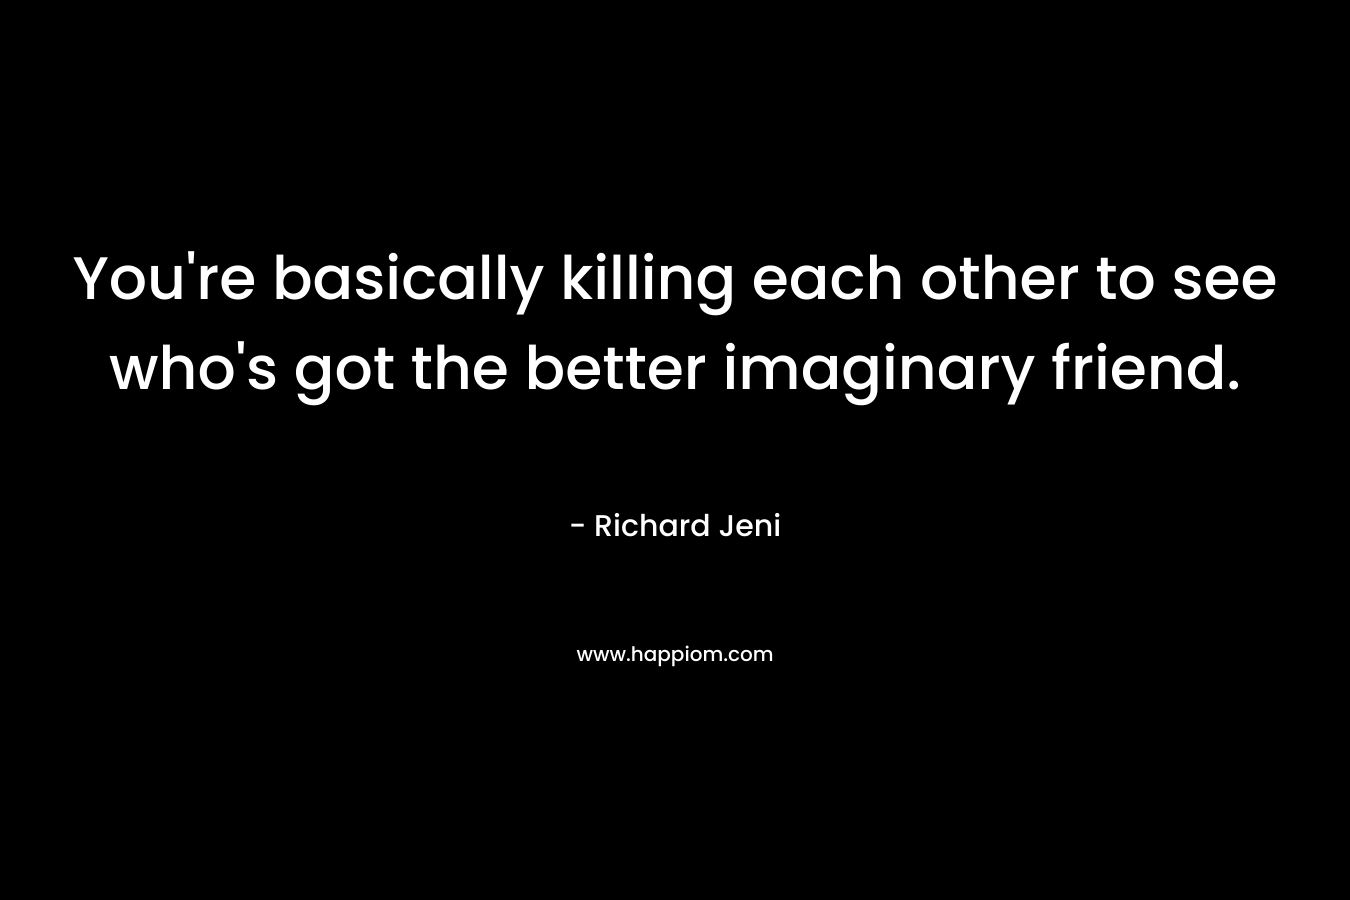 You're basically killing each other to see who's got the better imaginary friend.